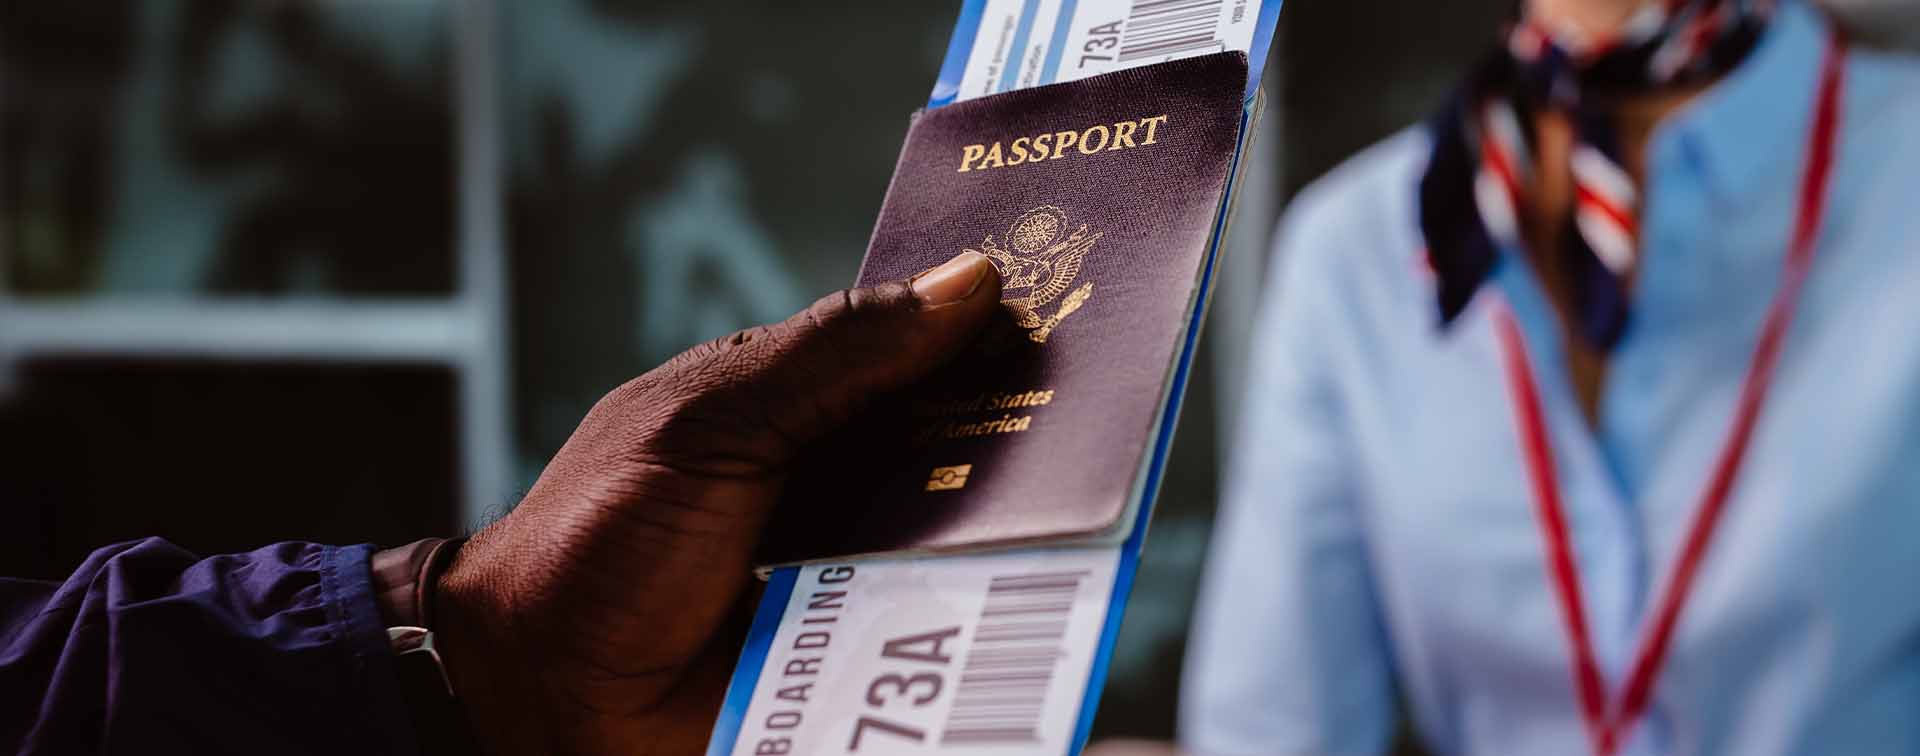 A person presenting their passport and boarding pass